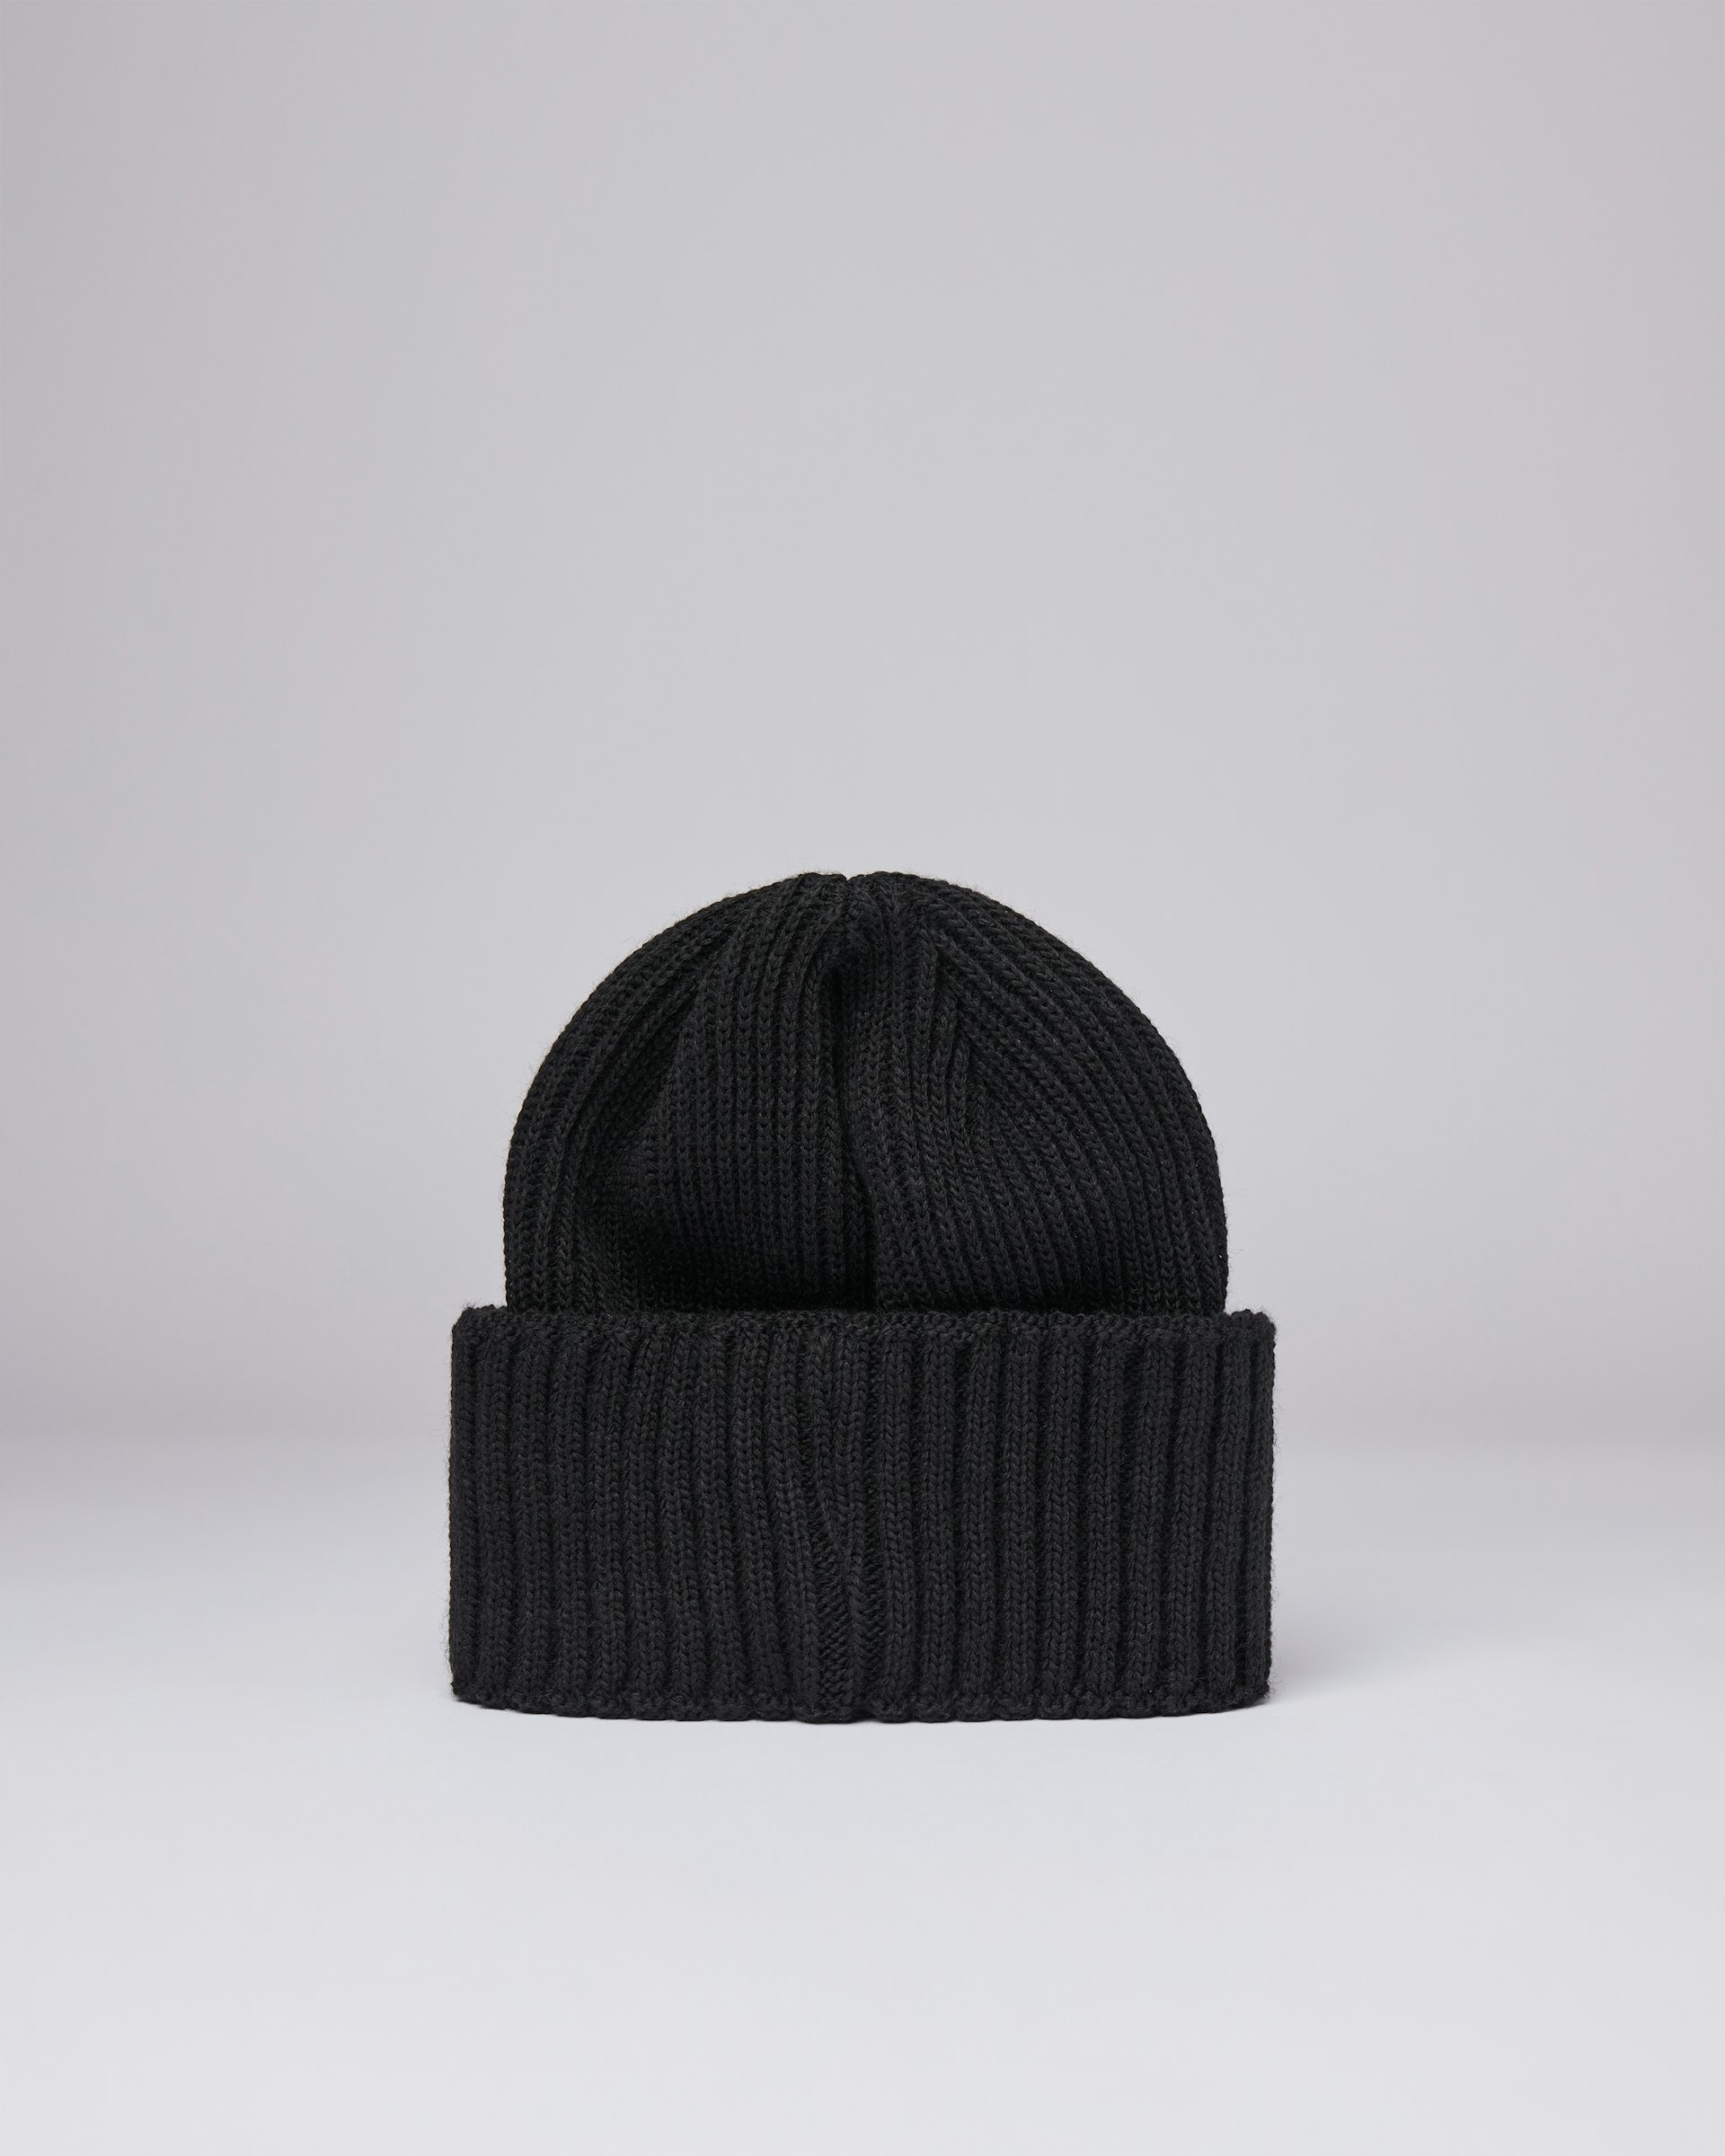 Knitted cap belongs to the category Items and is in color black (3 of 3)